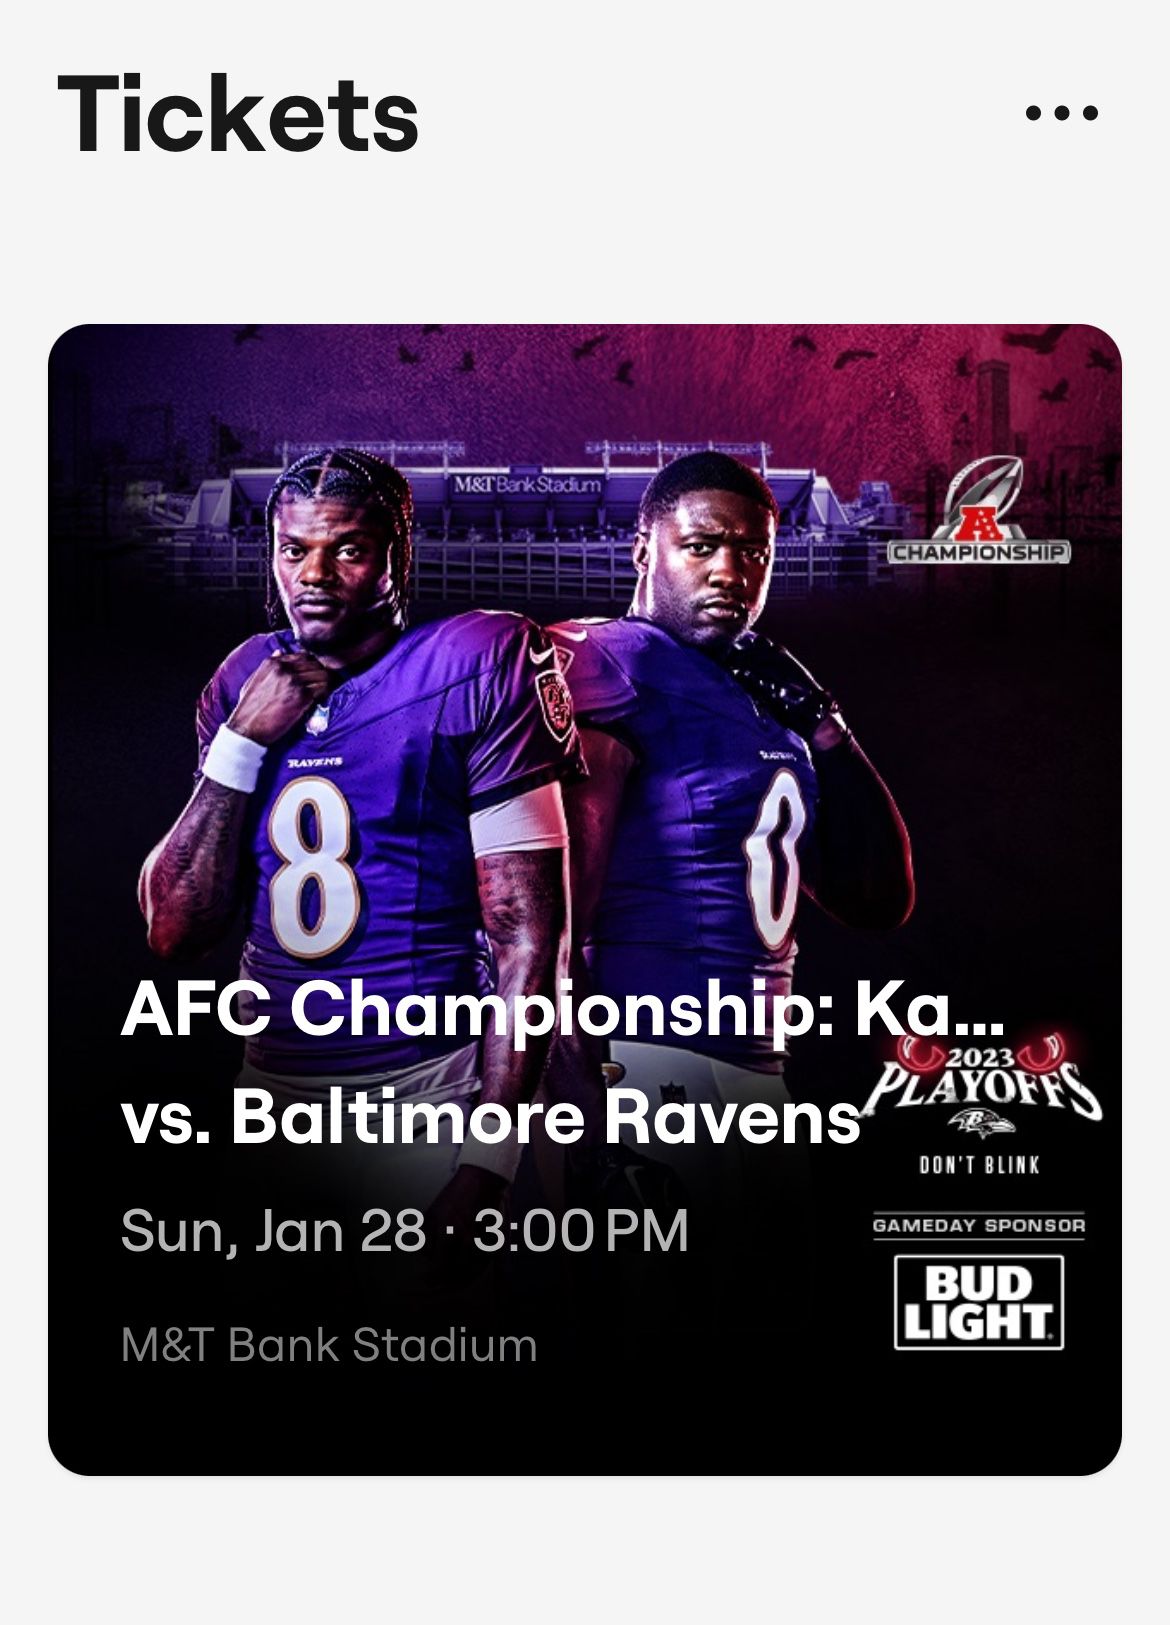 AFC Championship Game Tickets